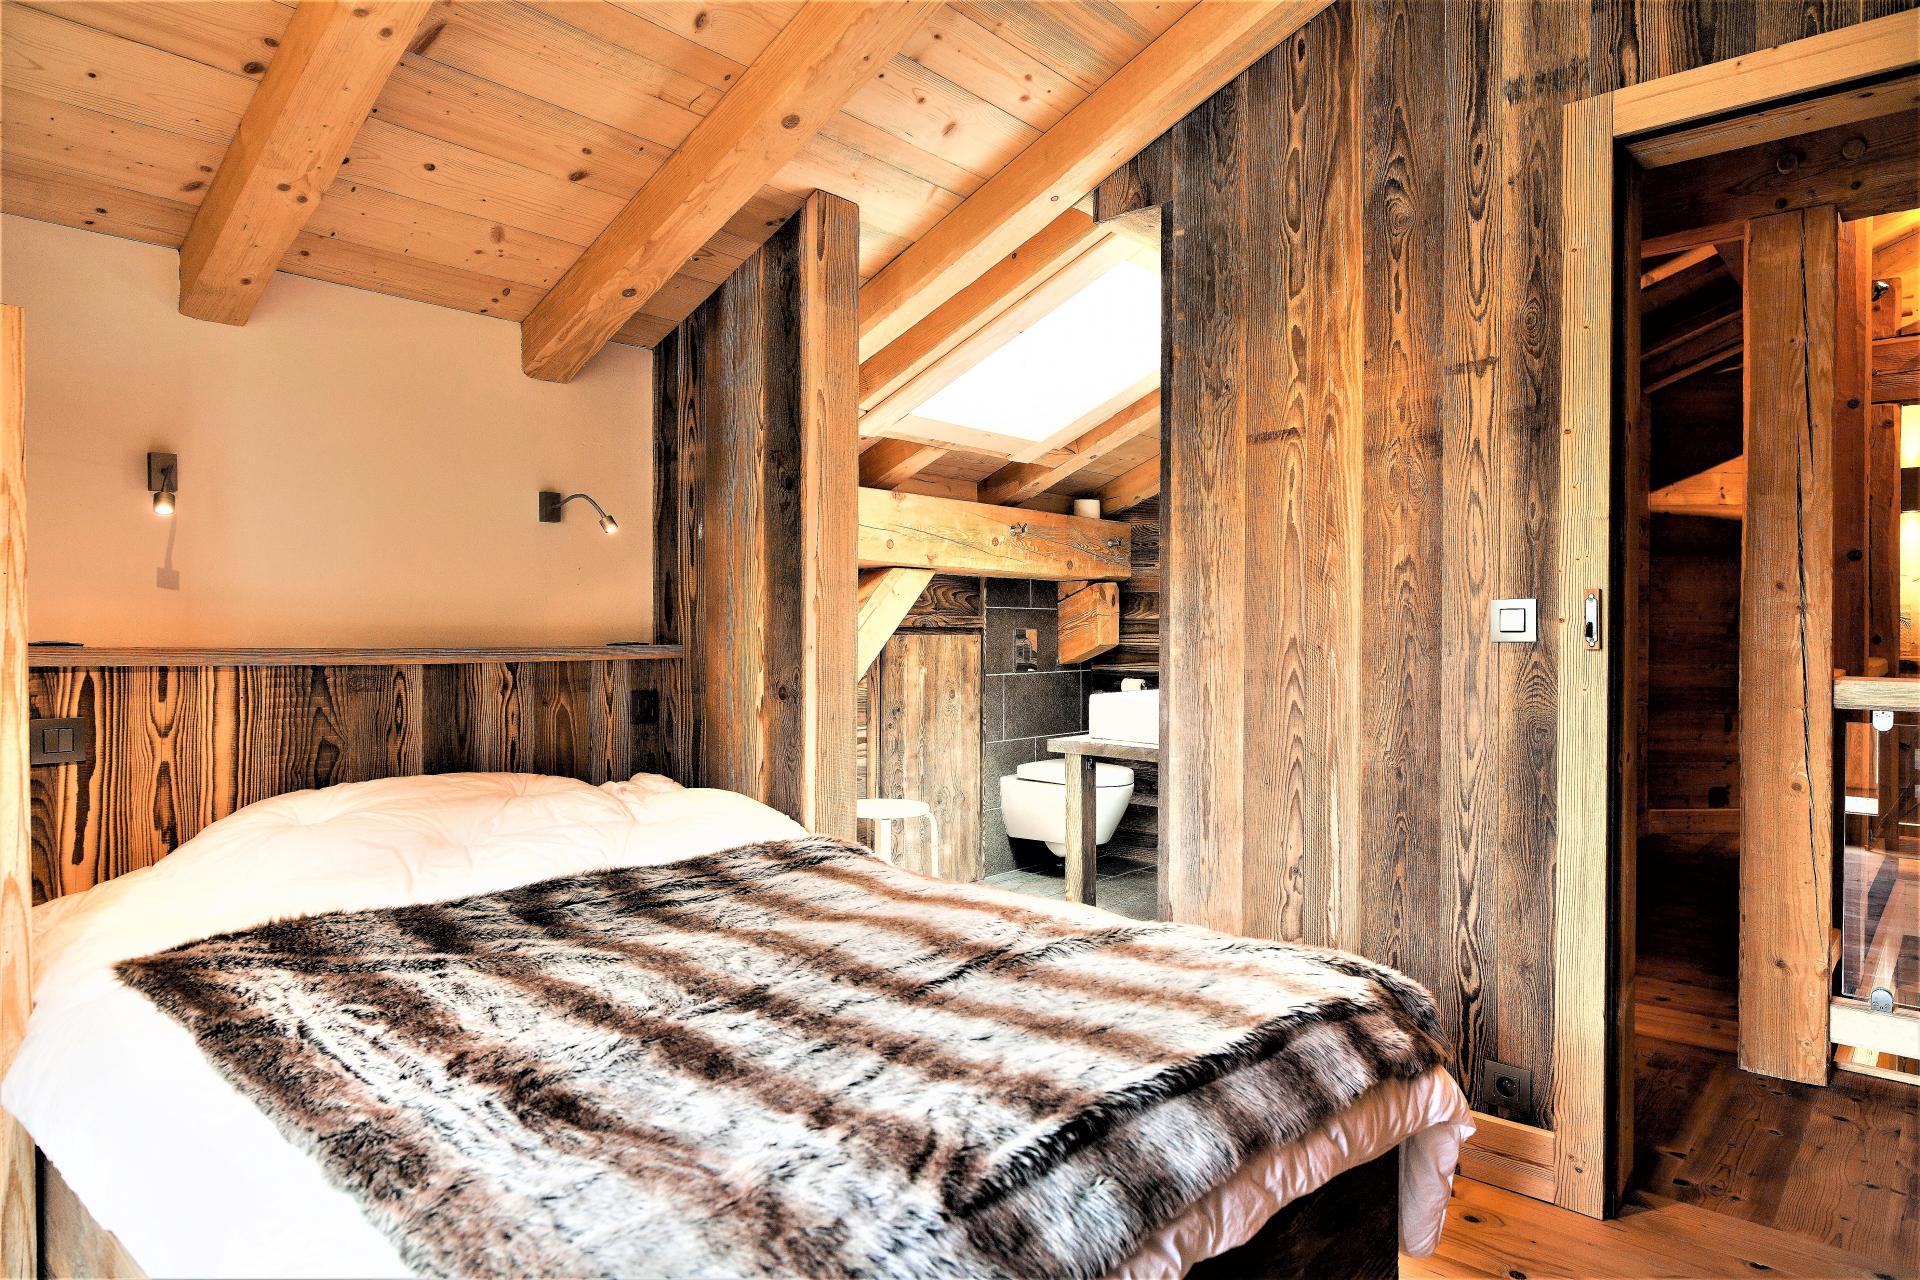 ANOTHER LOVELY ENSUITE BEDROOM IN A CHALET RENTAL IN FRENCH ALPS